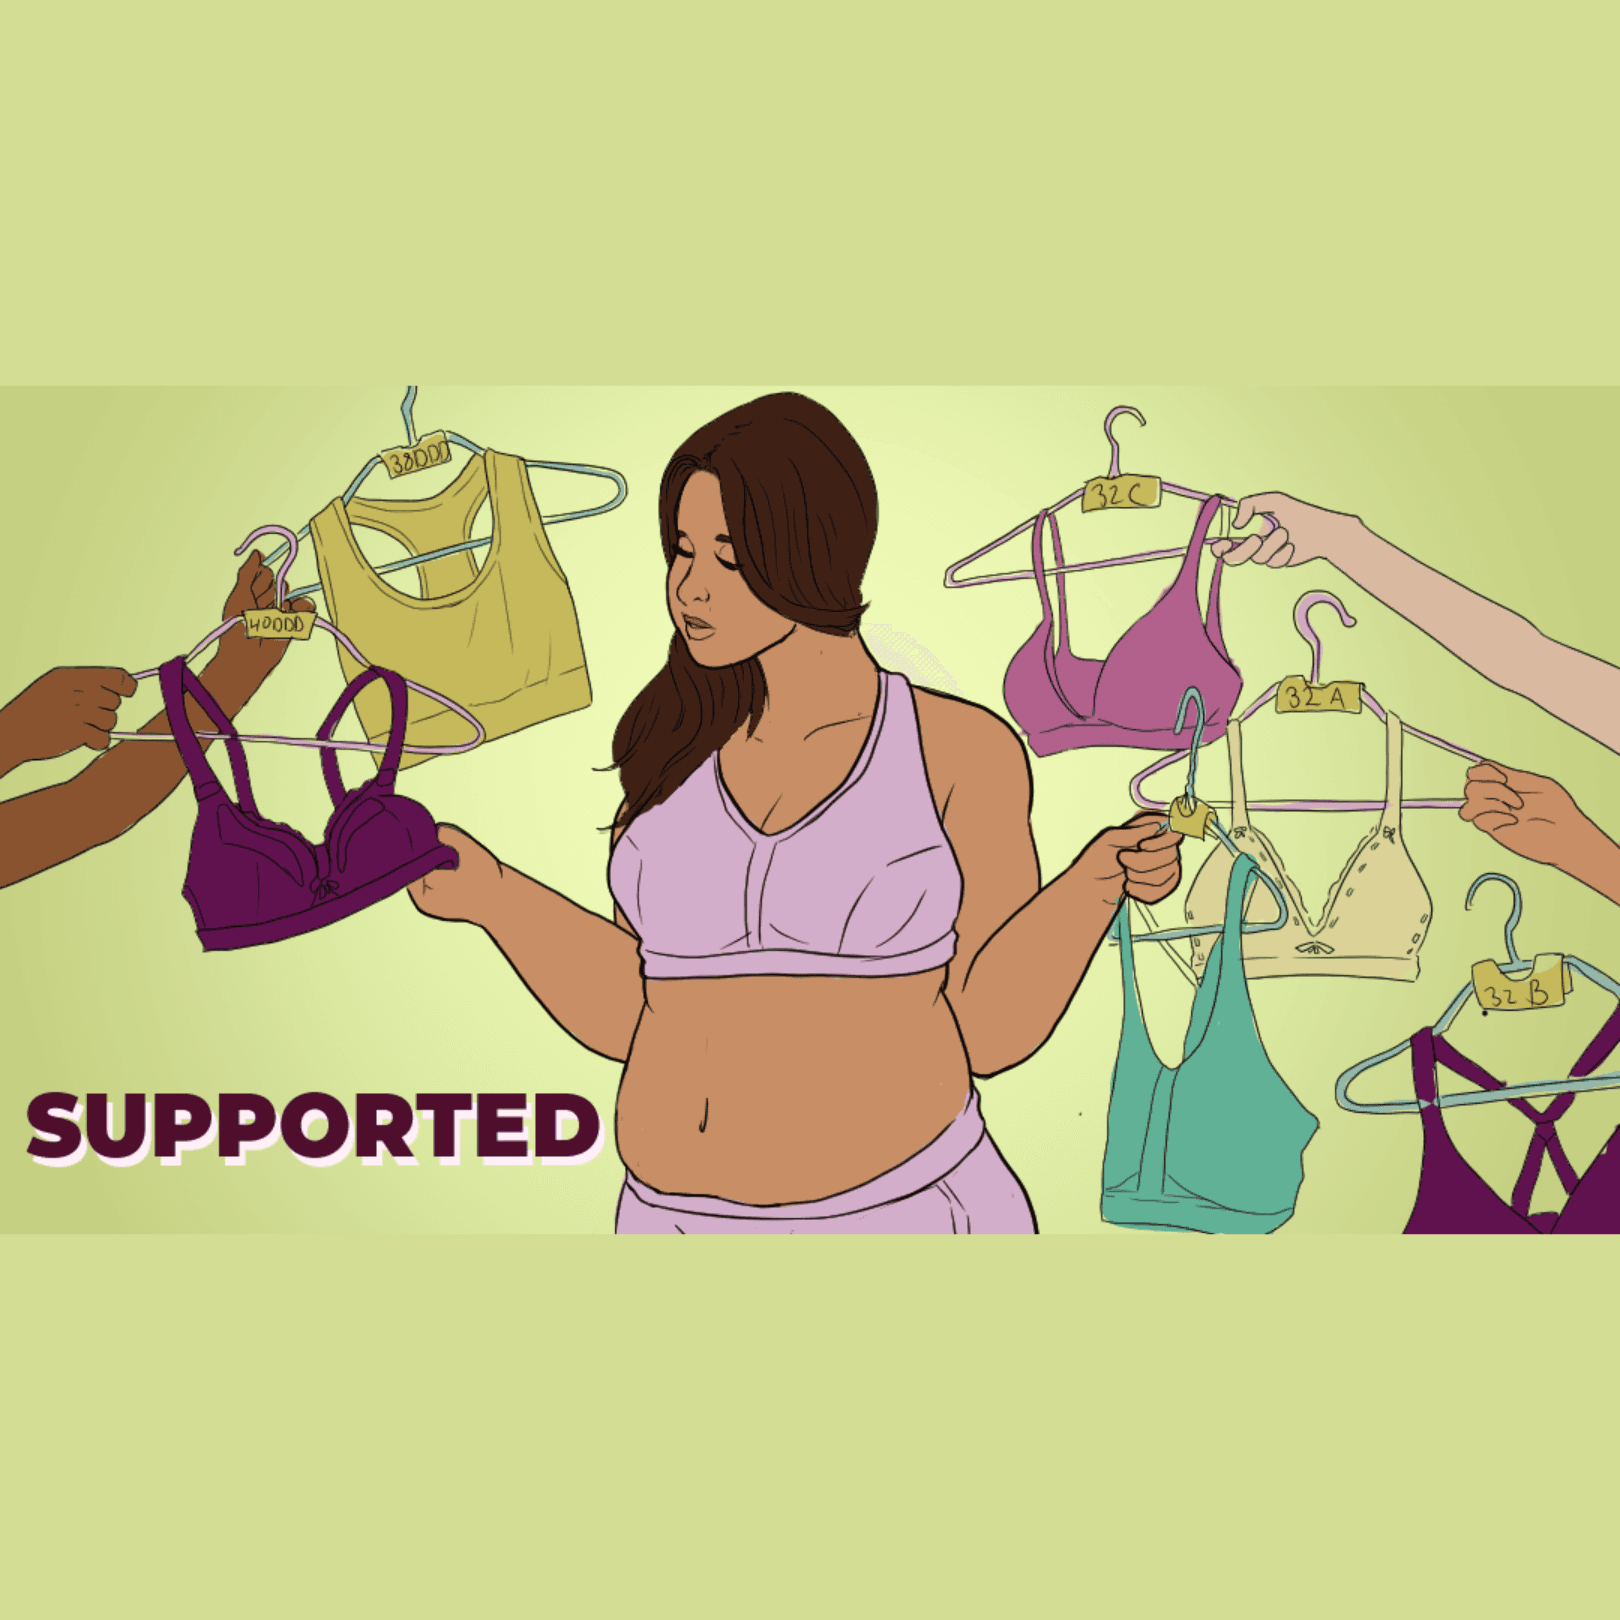 Thumbnail for "Supported: The Stories Behind Our Bras".